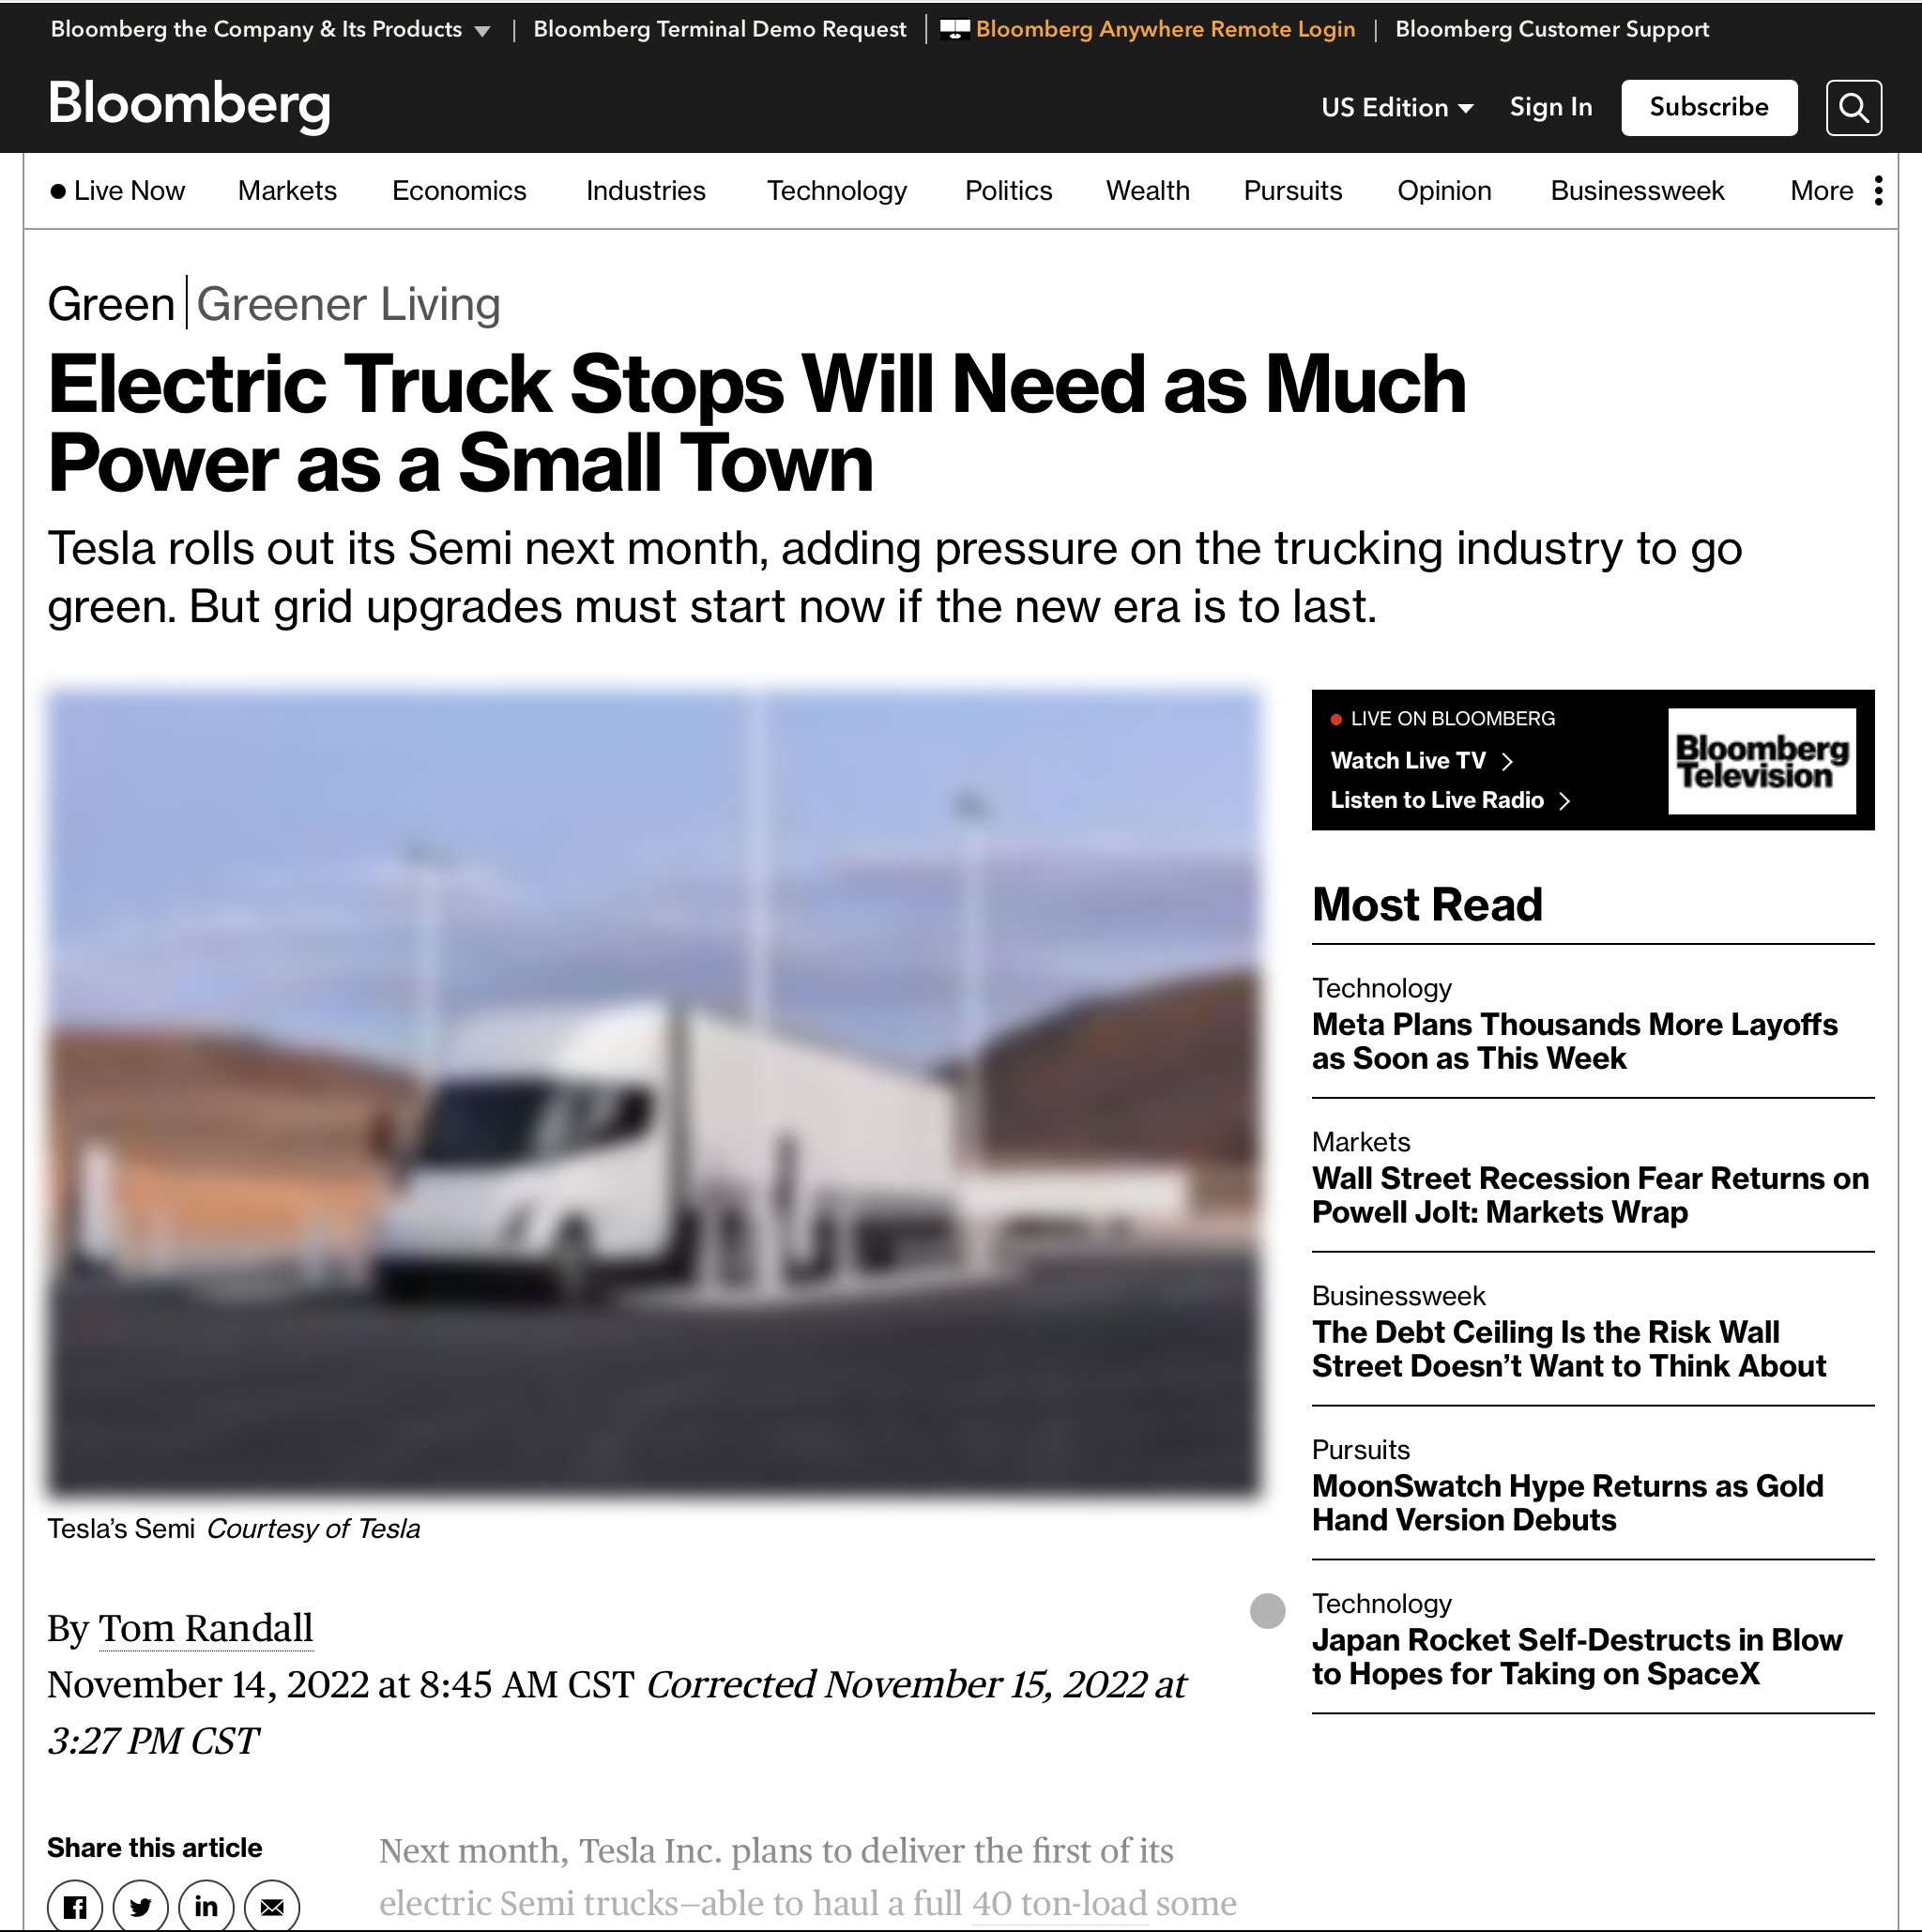 Stable EV charging data featured in Bloomberg